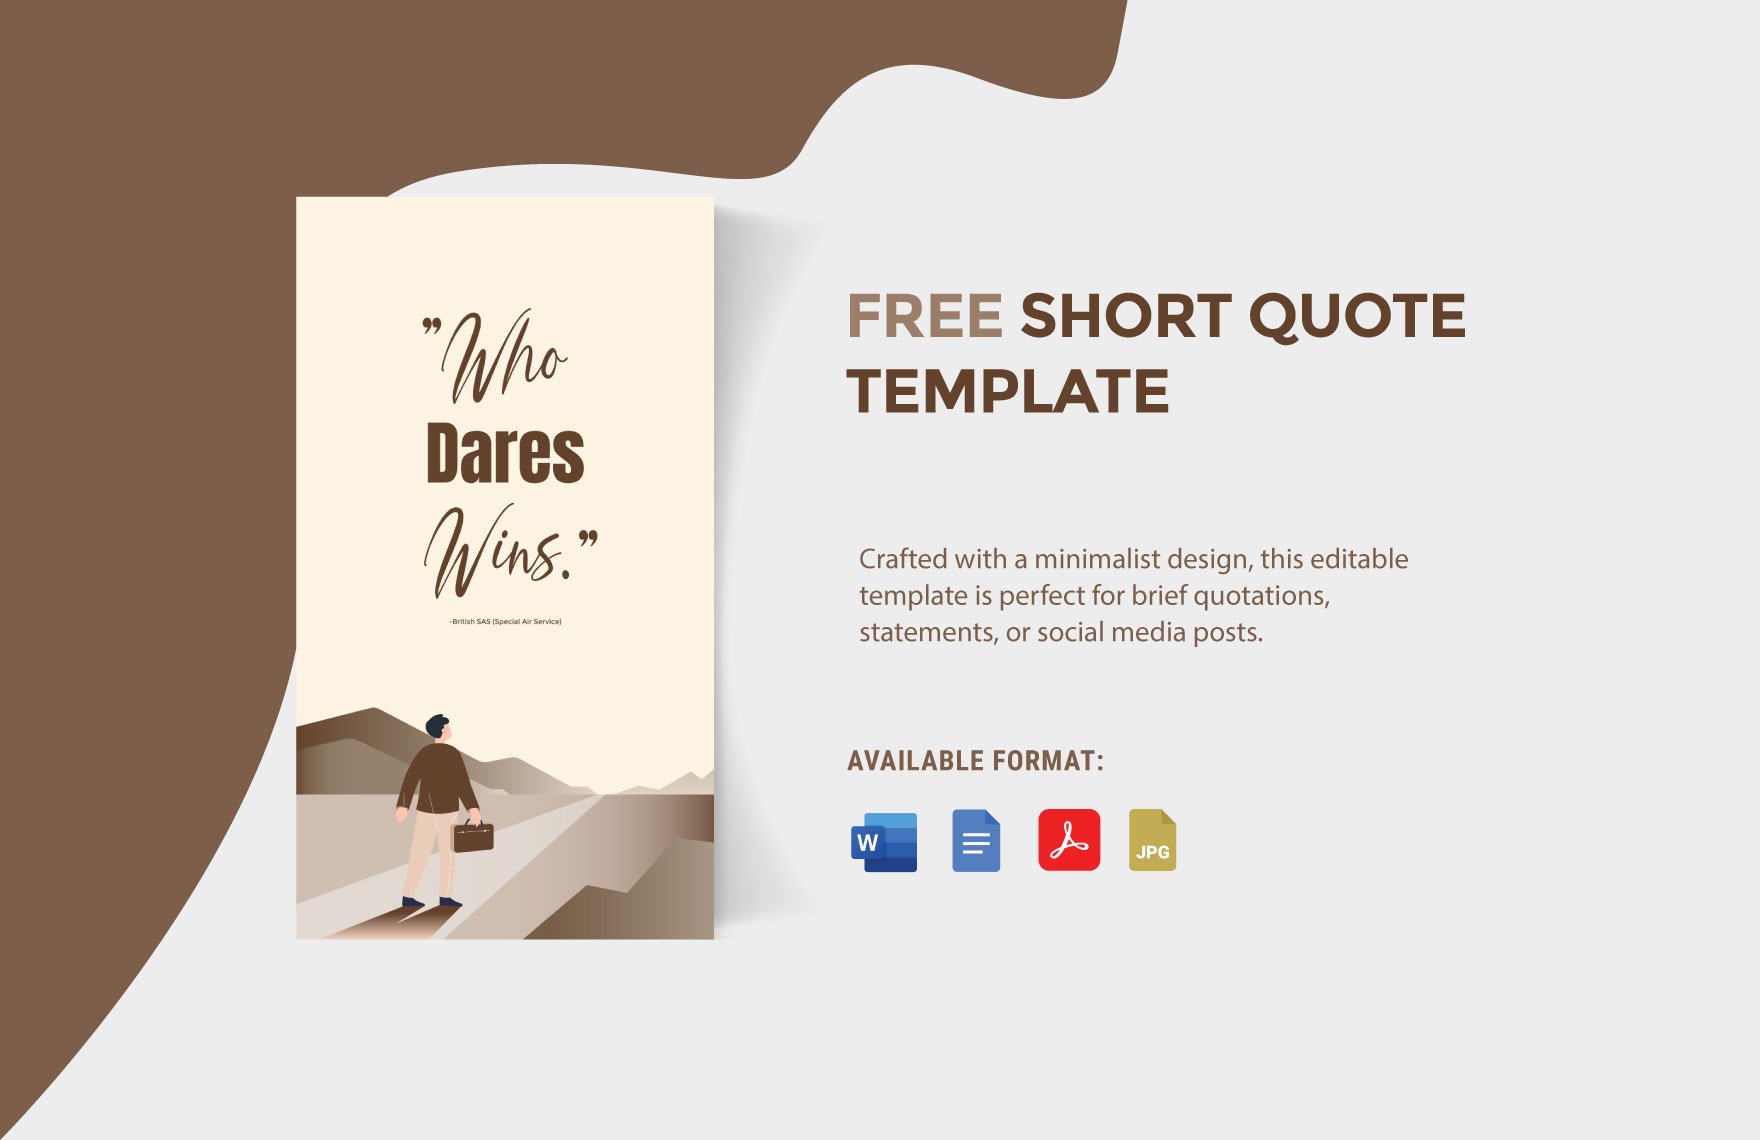 Free Short Quote Template